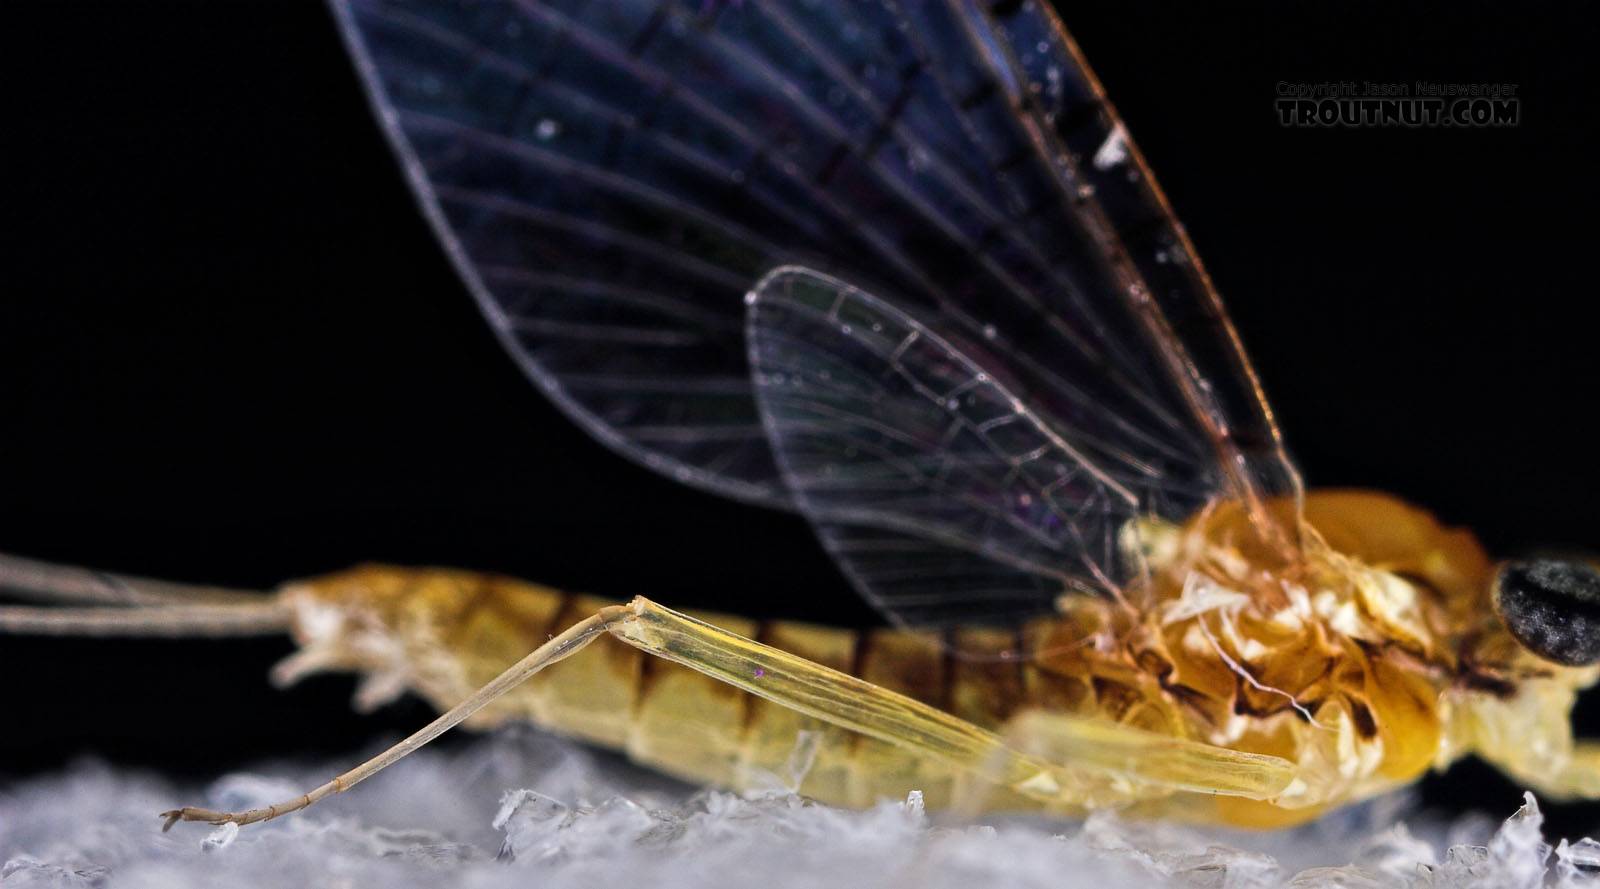 Female Leucrocuta hebe (Little Yellow Quill) Mayfly Spinner from Willowemoc Creek in New York